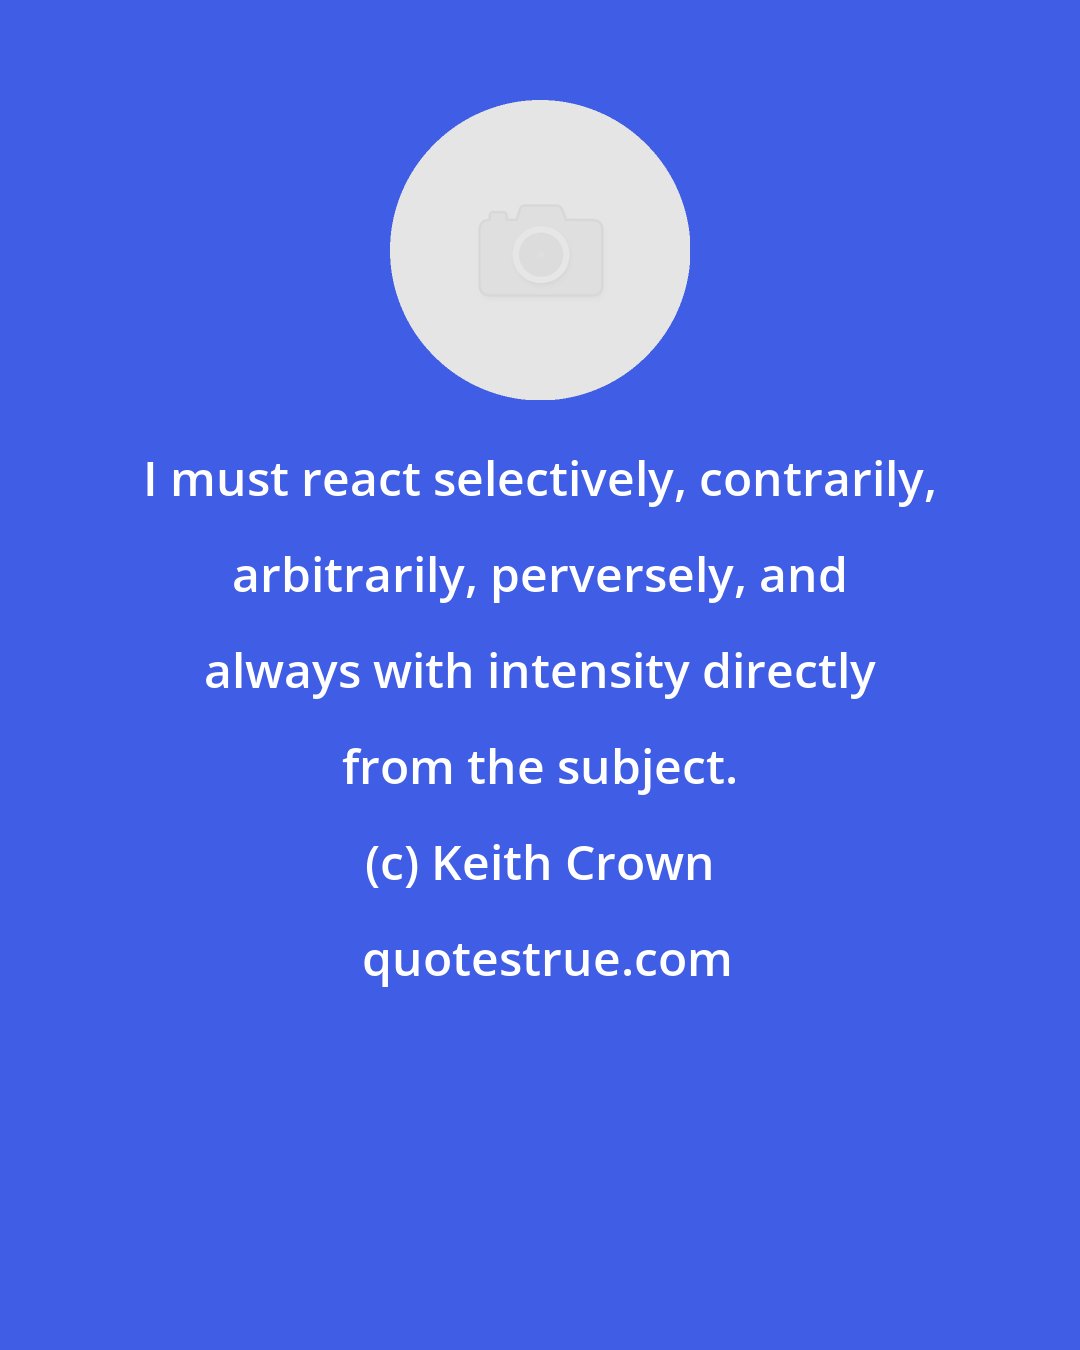 Keith Crown: I must react selectively, contrarily, arbitrarily, perversely, and always with intensity directly from the subject.